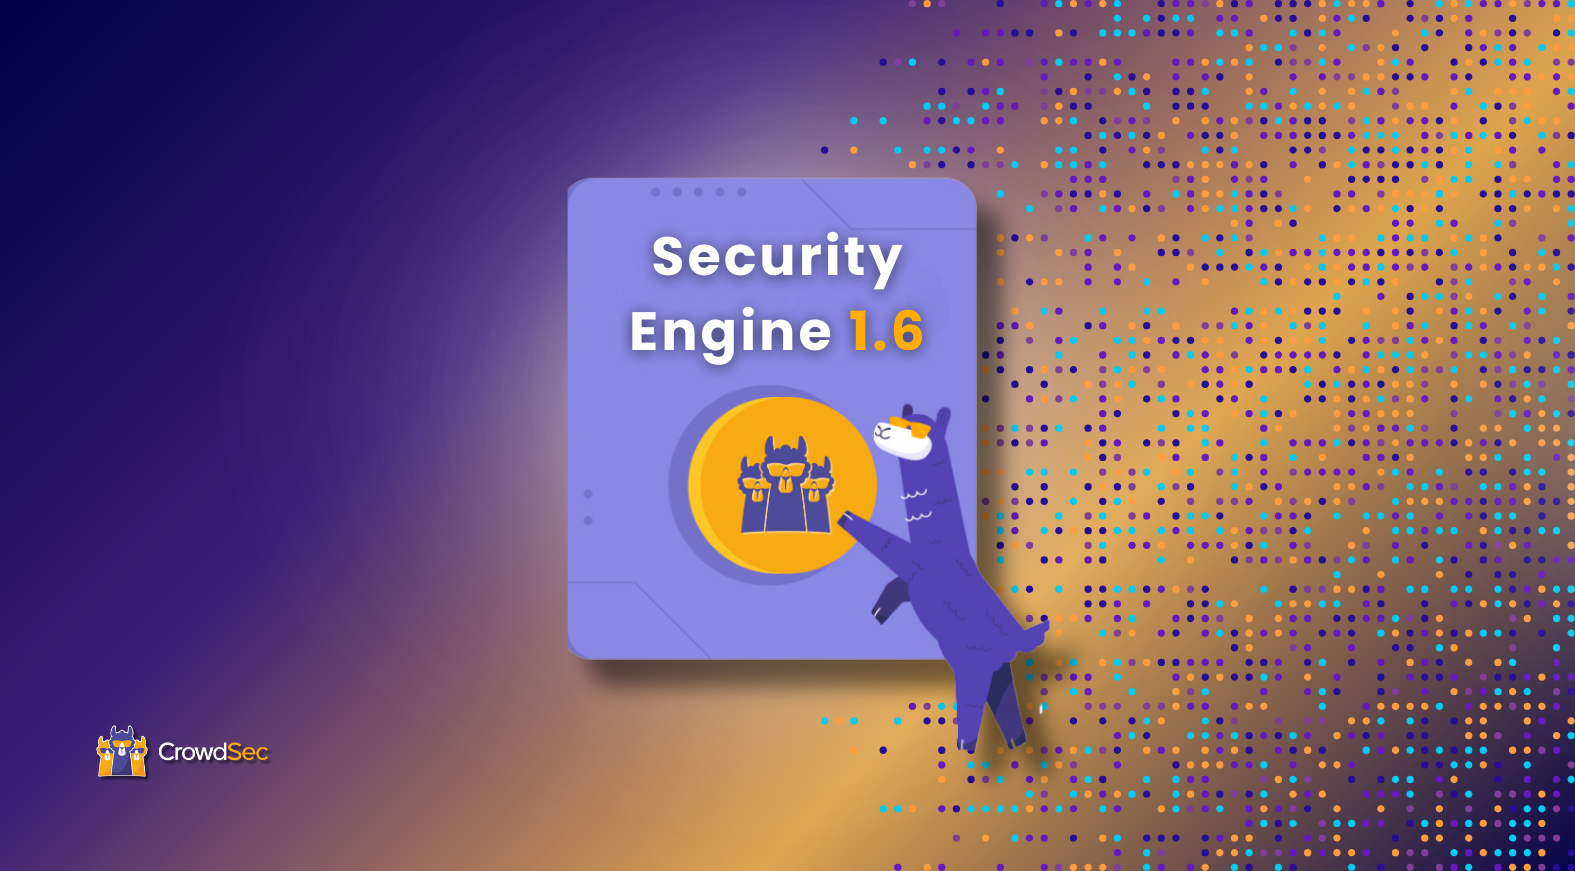 Announcing the Release of the CrowdSec Security Engine 1.6